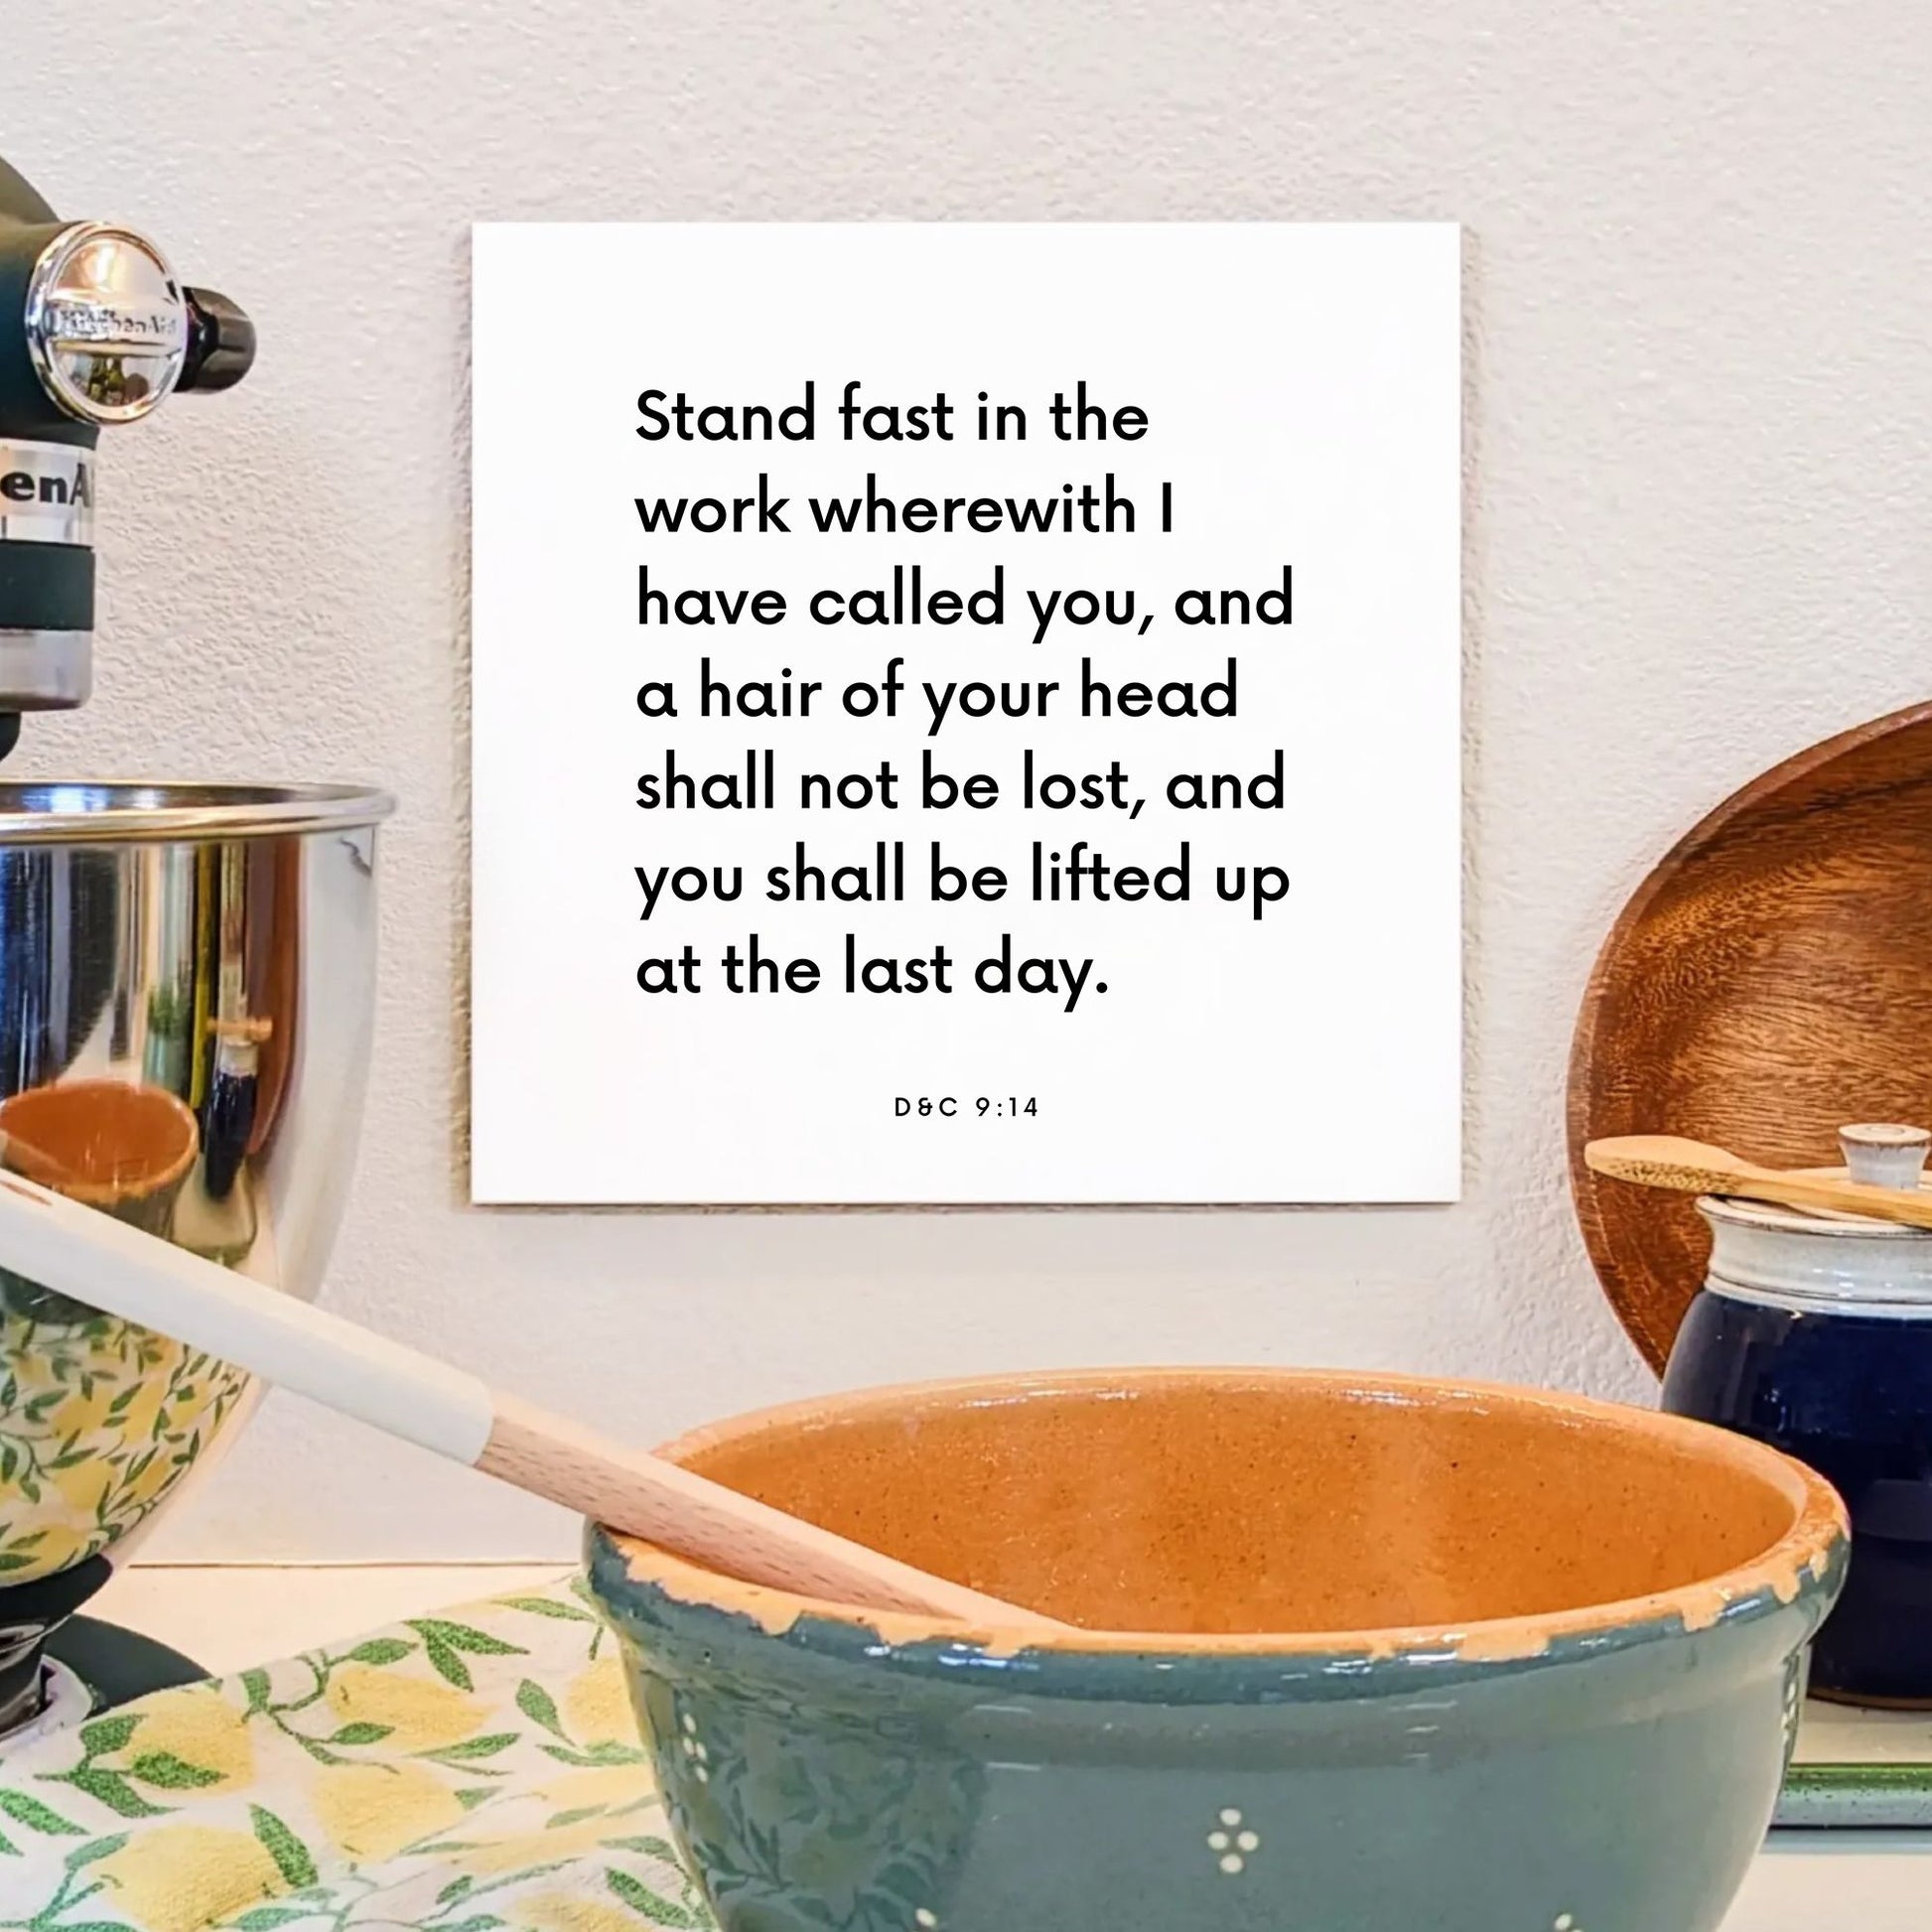 Kitchen mouting of the scripture tile for D&C 9:14 - "Stand fast in the work wherewith I have called you"